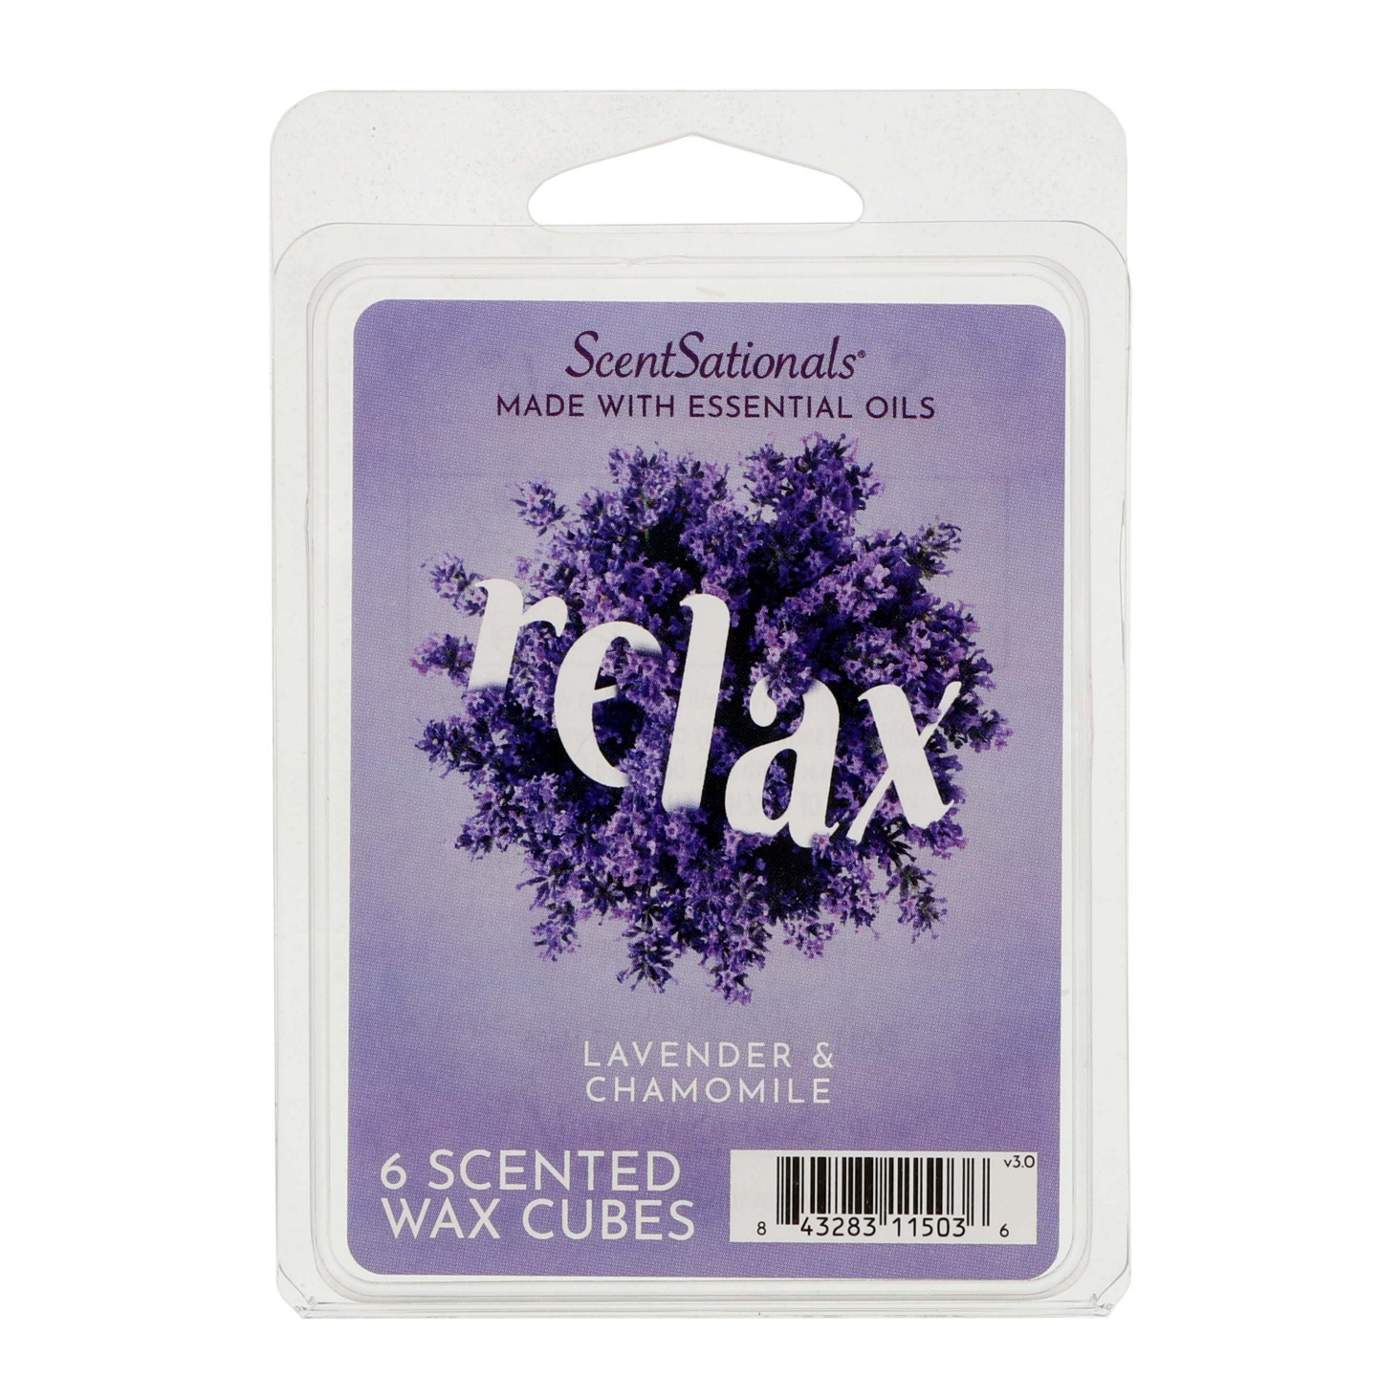 ScentSationals Relax Lavender & Chamomile Scented Wax Cubes, 6 Ct; image 1 of 2